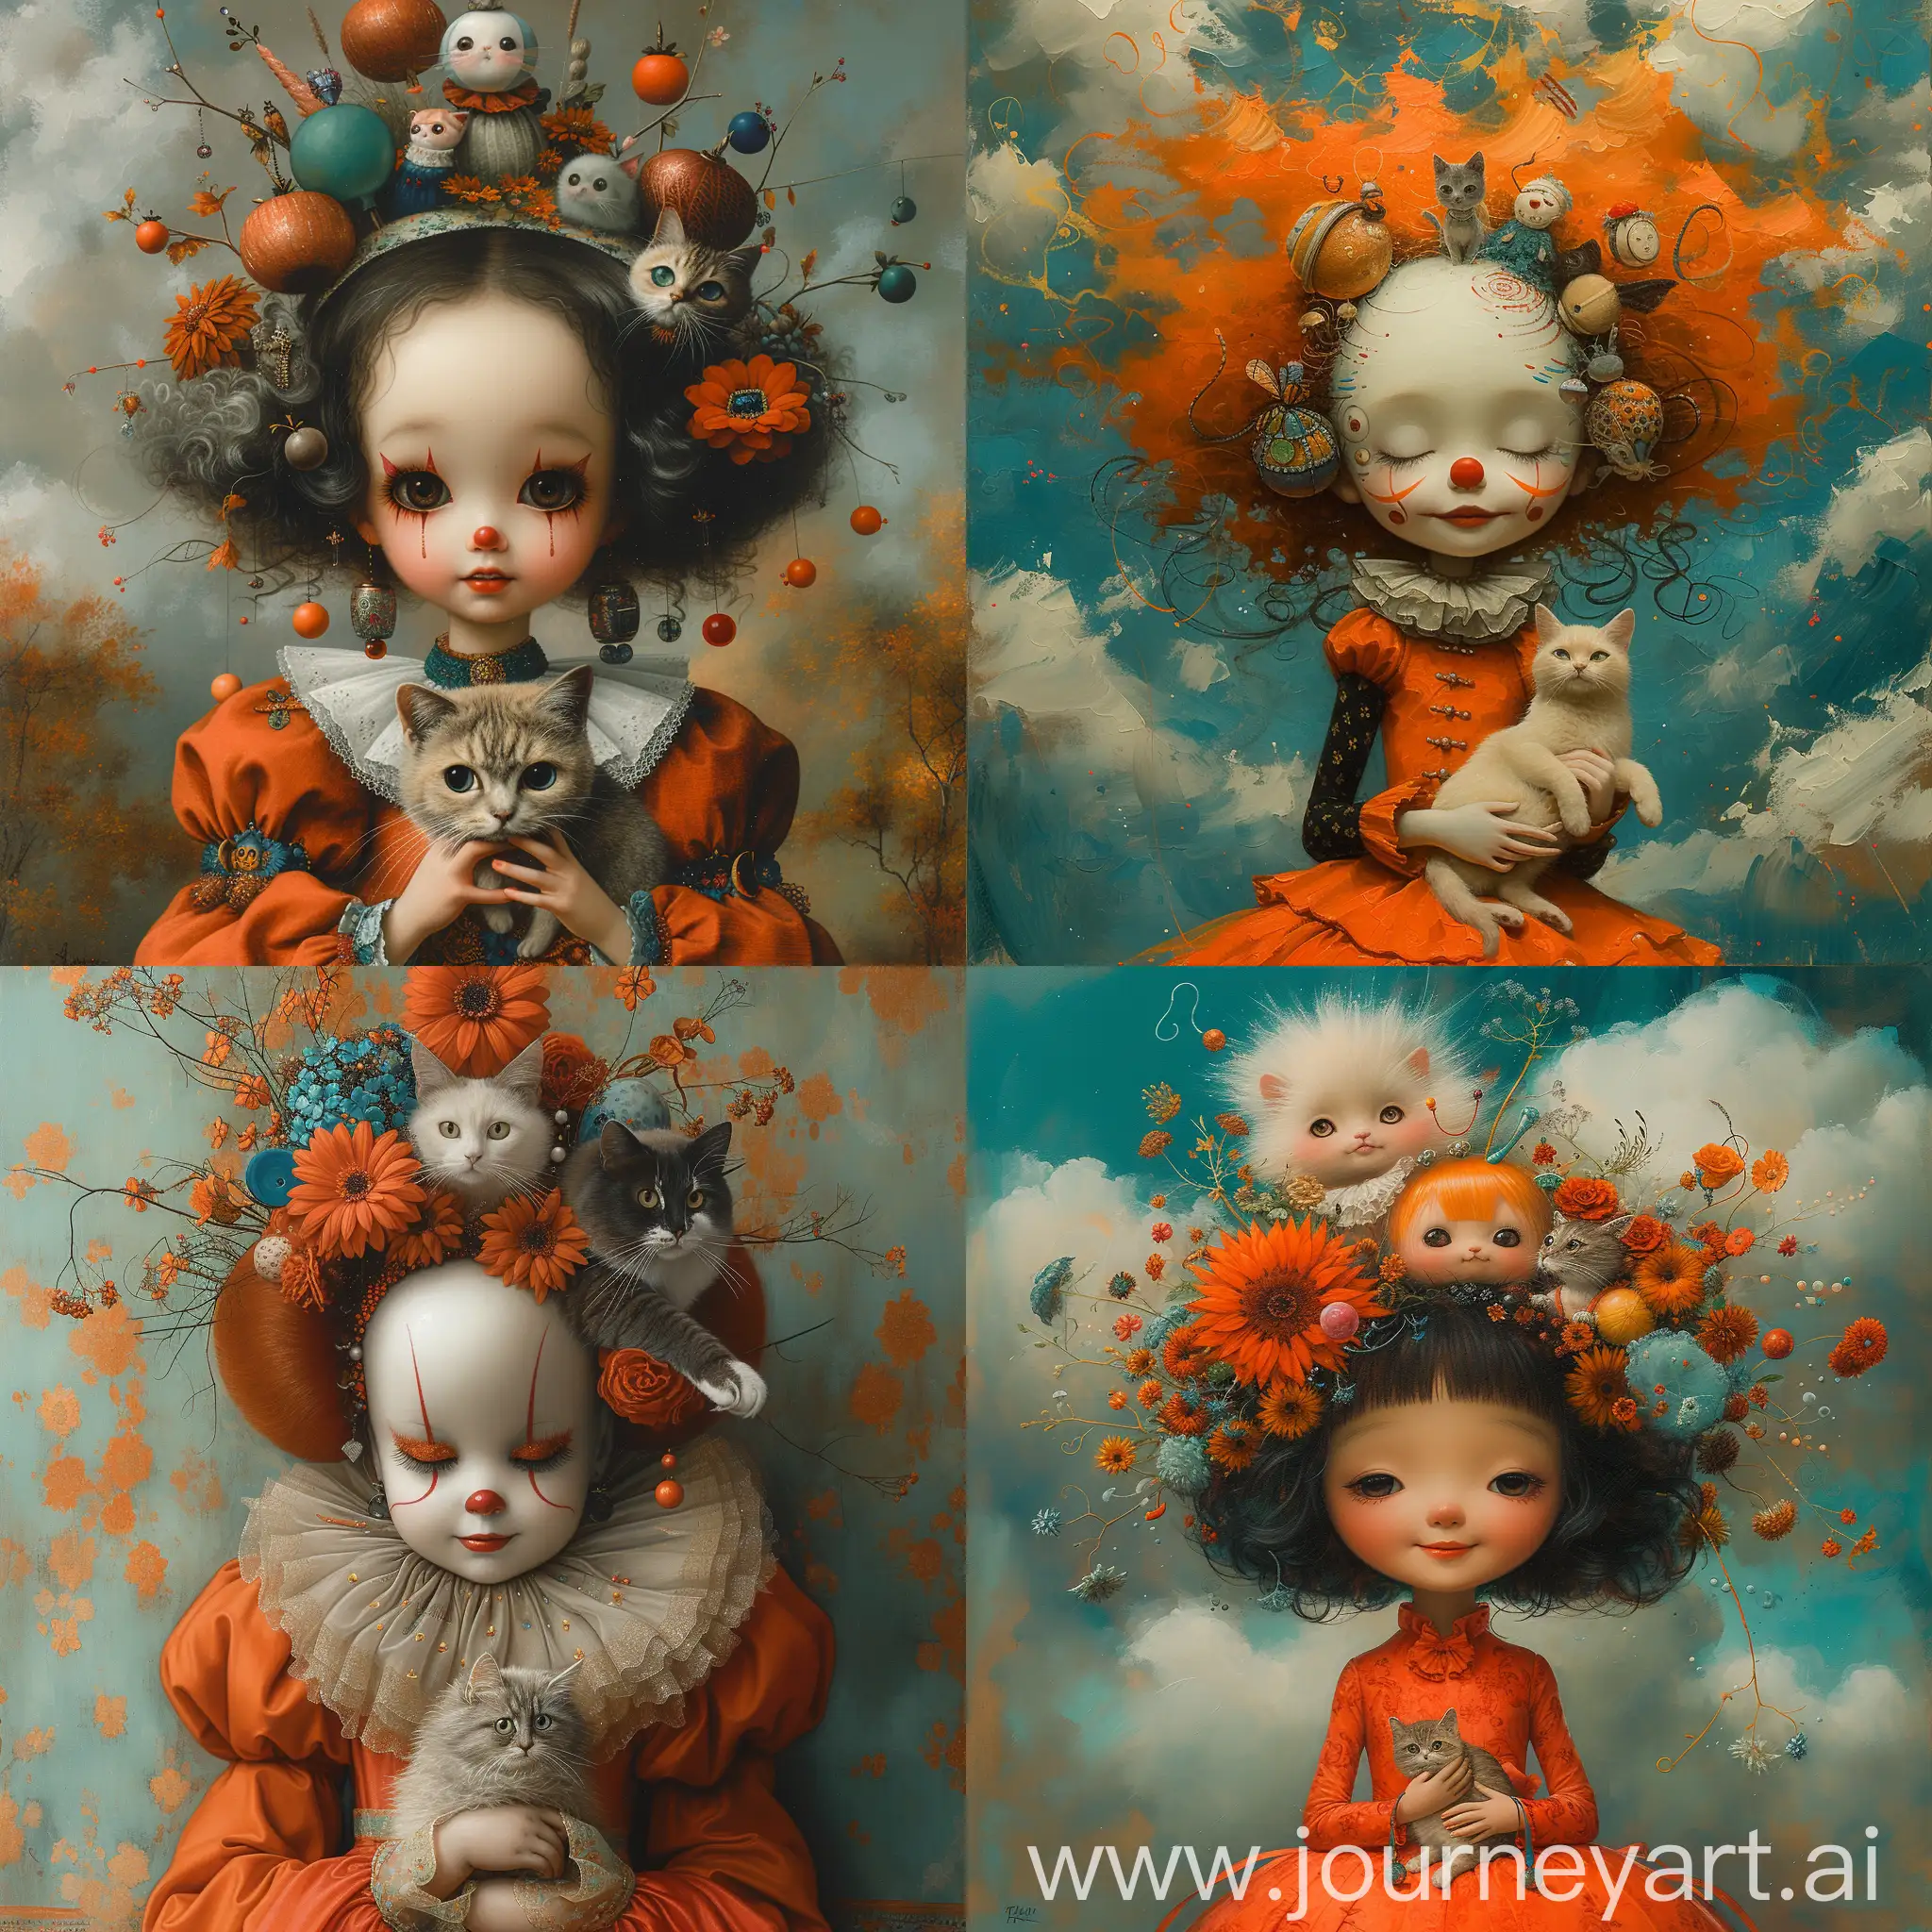 Surreal-China-Clown-Doll-Holding-Cat-in-Matte-Oil-Painting